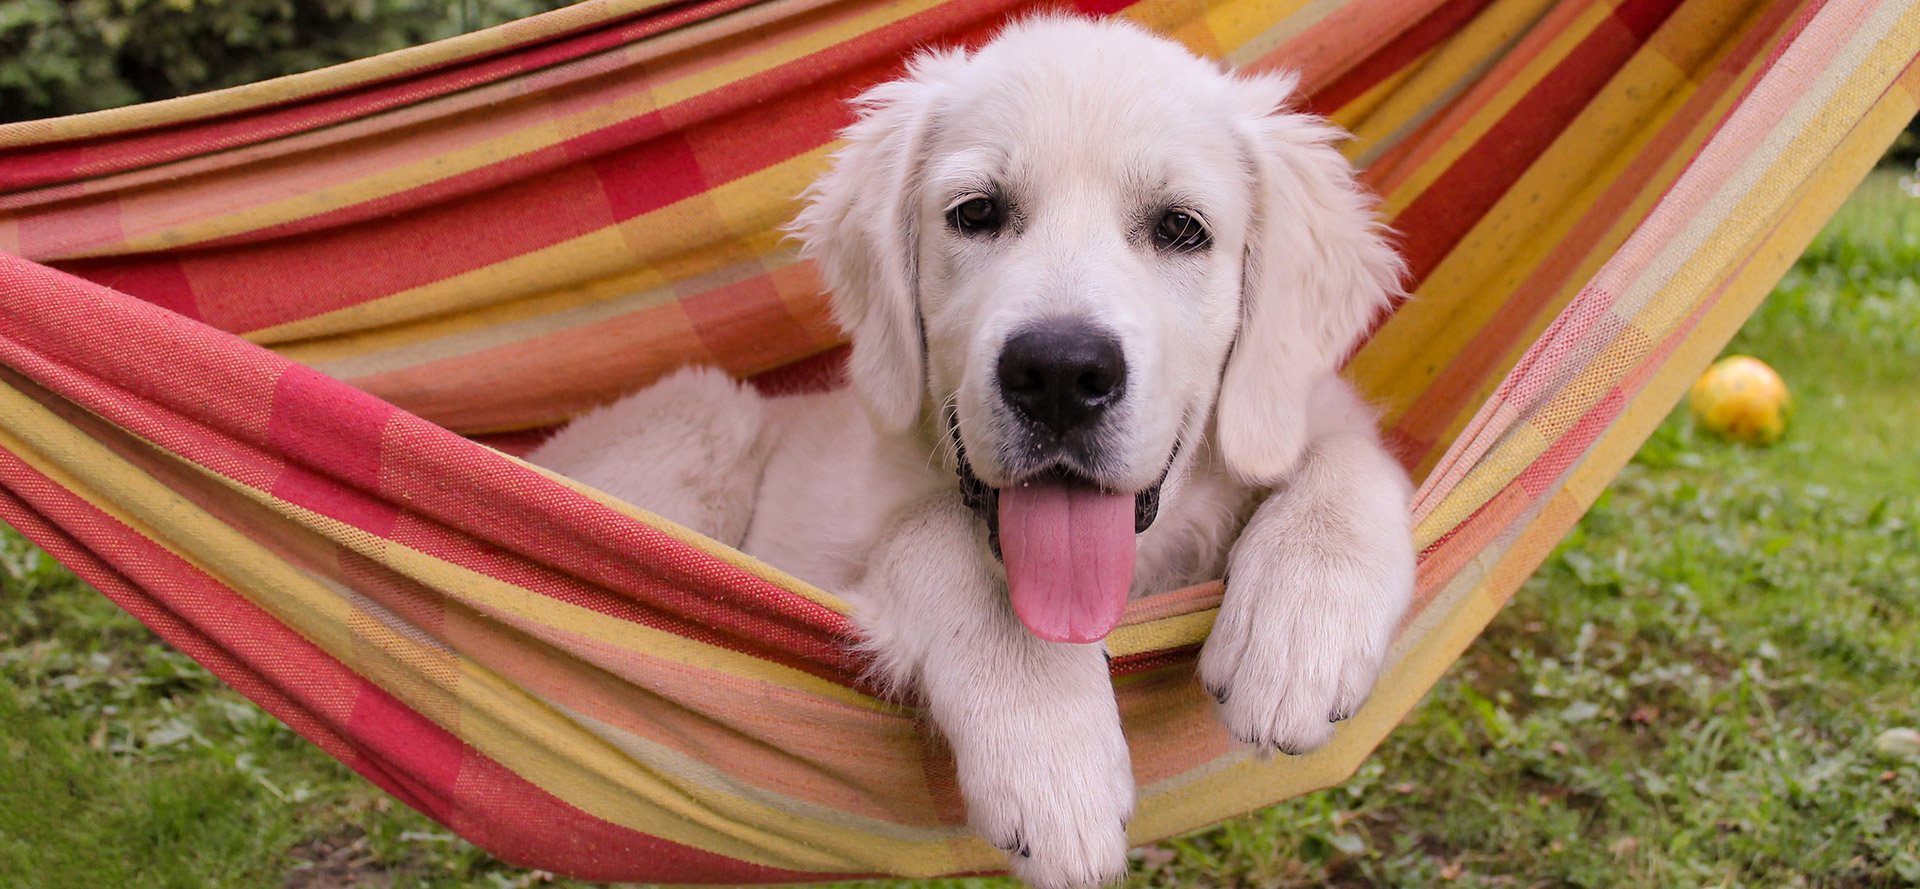 A white dog laying in a hammock.